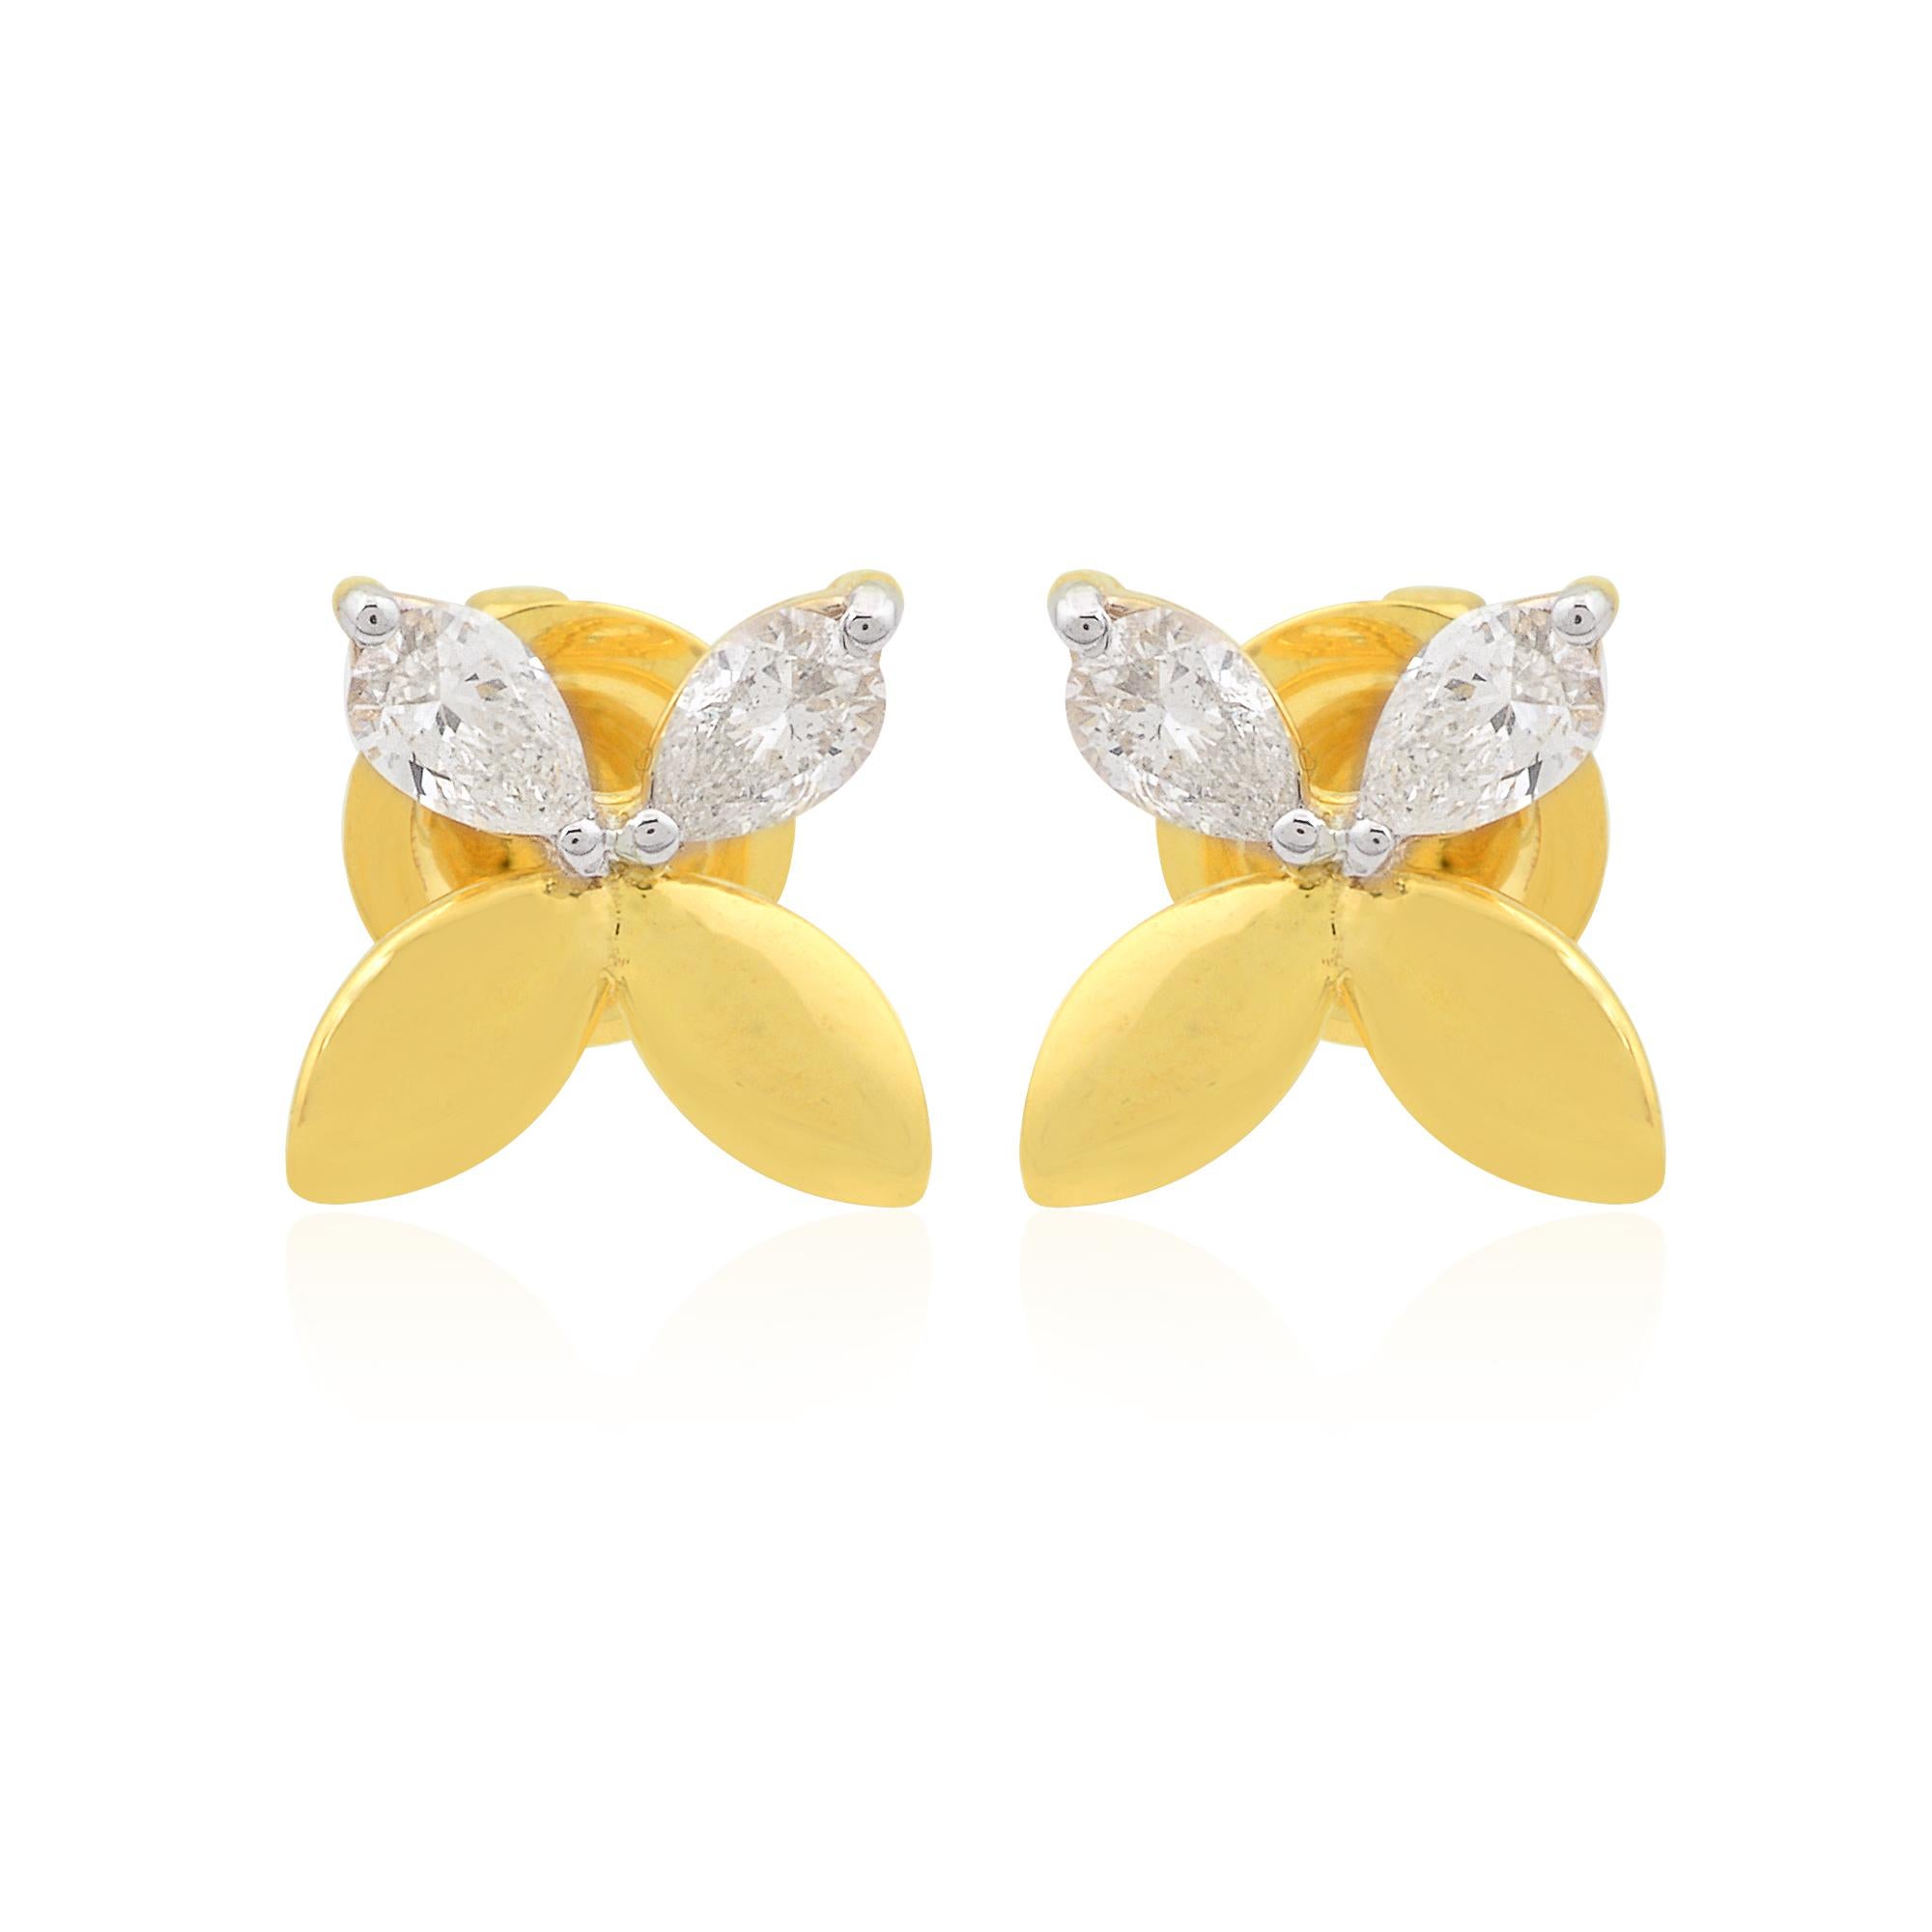 Item Code :- SEE-16230 (SEE-1630E )
Gross Weight :- 3.11 gm
18k Yellow Gold Weight :- 3.01 gm
Diamond Weight :- 0.52 Carat  ( AVERAGE DIAMOND CLARITY SI1-SI2 & COLOR H-I )
Earrings Size :- 11x10 mm approx.

✦ Sizing
.....................
We can